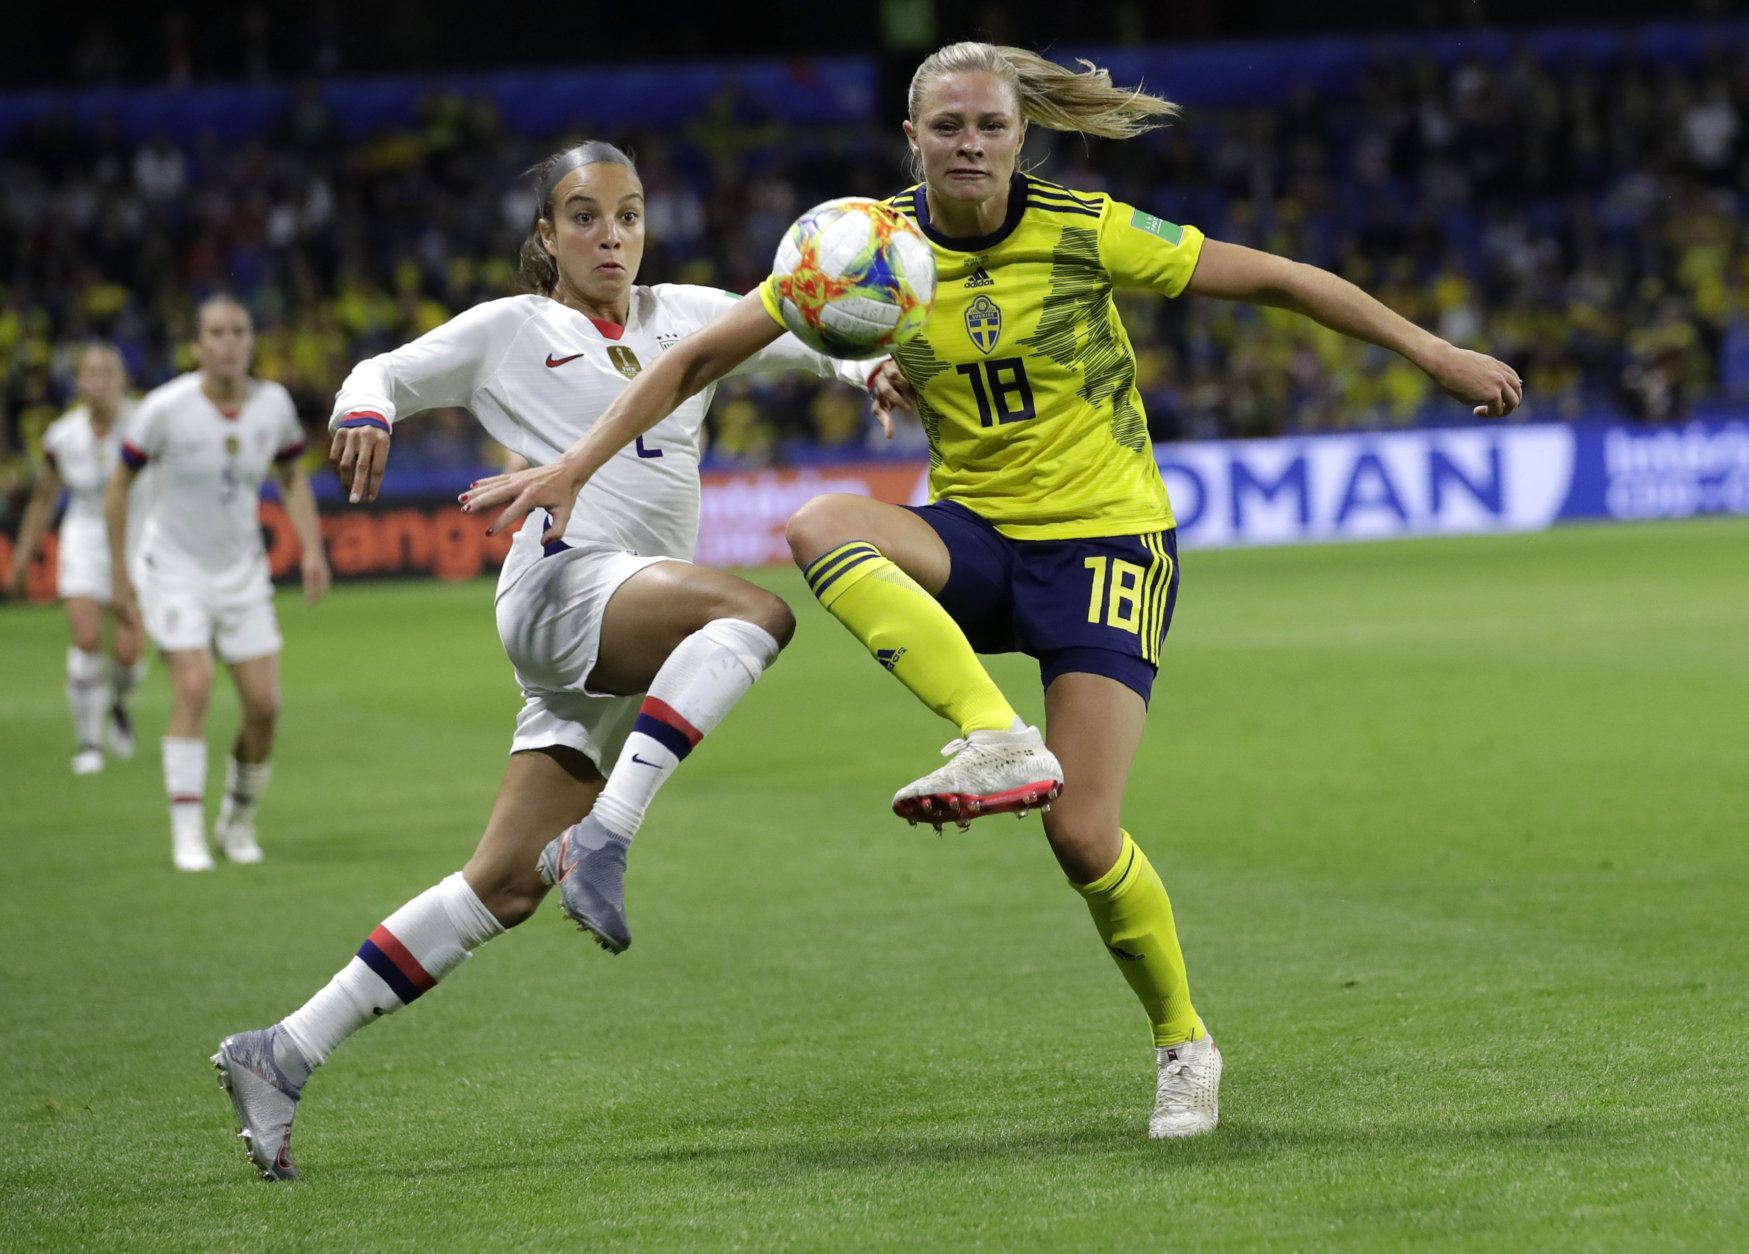 United States' Mallory Pugh, left, and Sweden's Fridolina Rolfo battle for the gal during the Women's World Cup Group F soccer match between Sweden and the United States at Stade Océane, in Le Havre, France, Thursday, June 20, 2019. (AP Photo/Alessandra Tarantino)